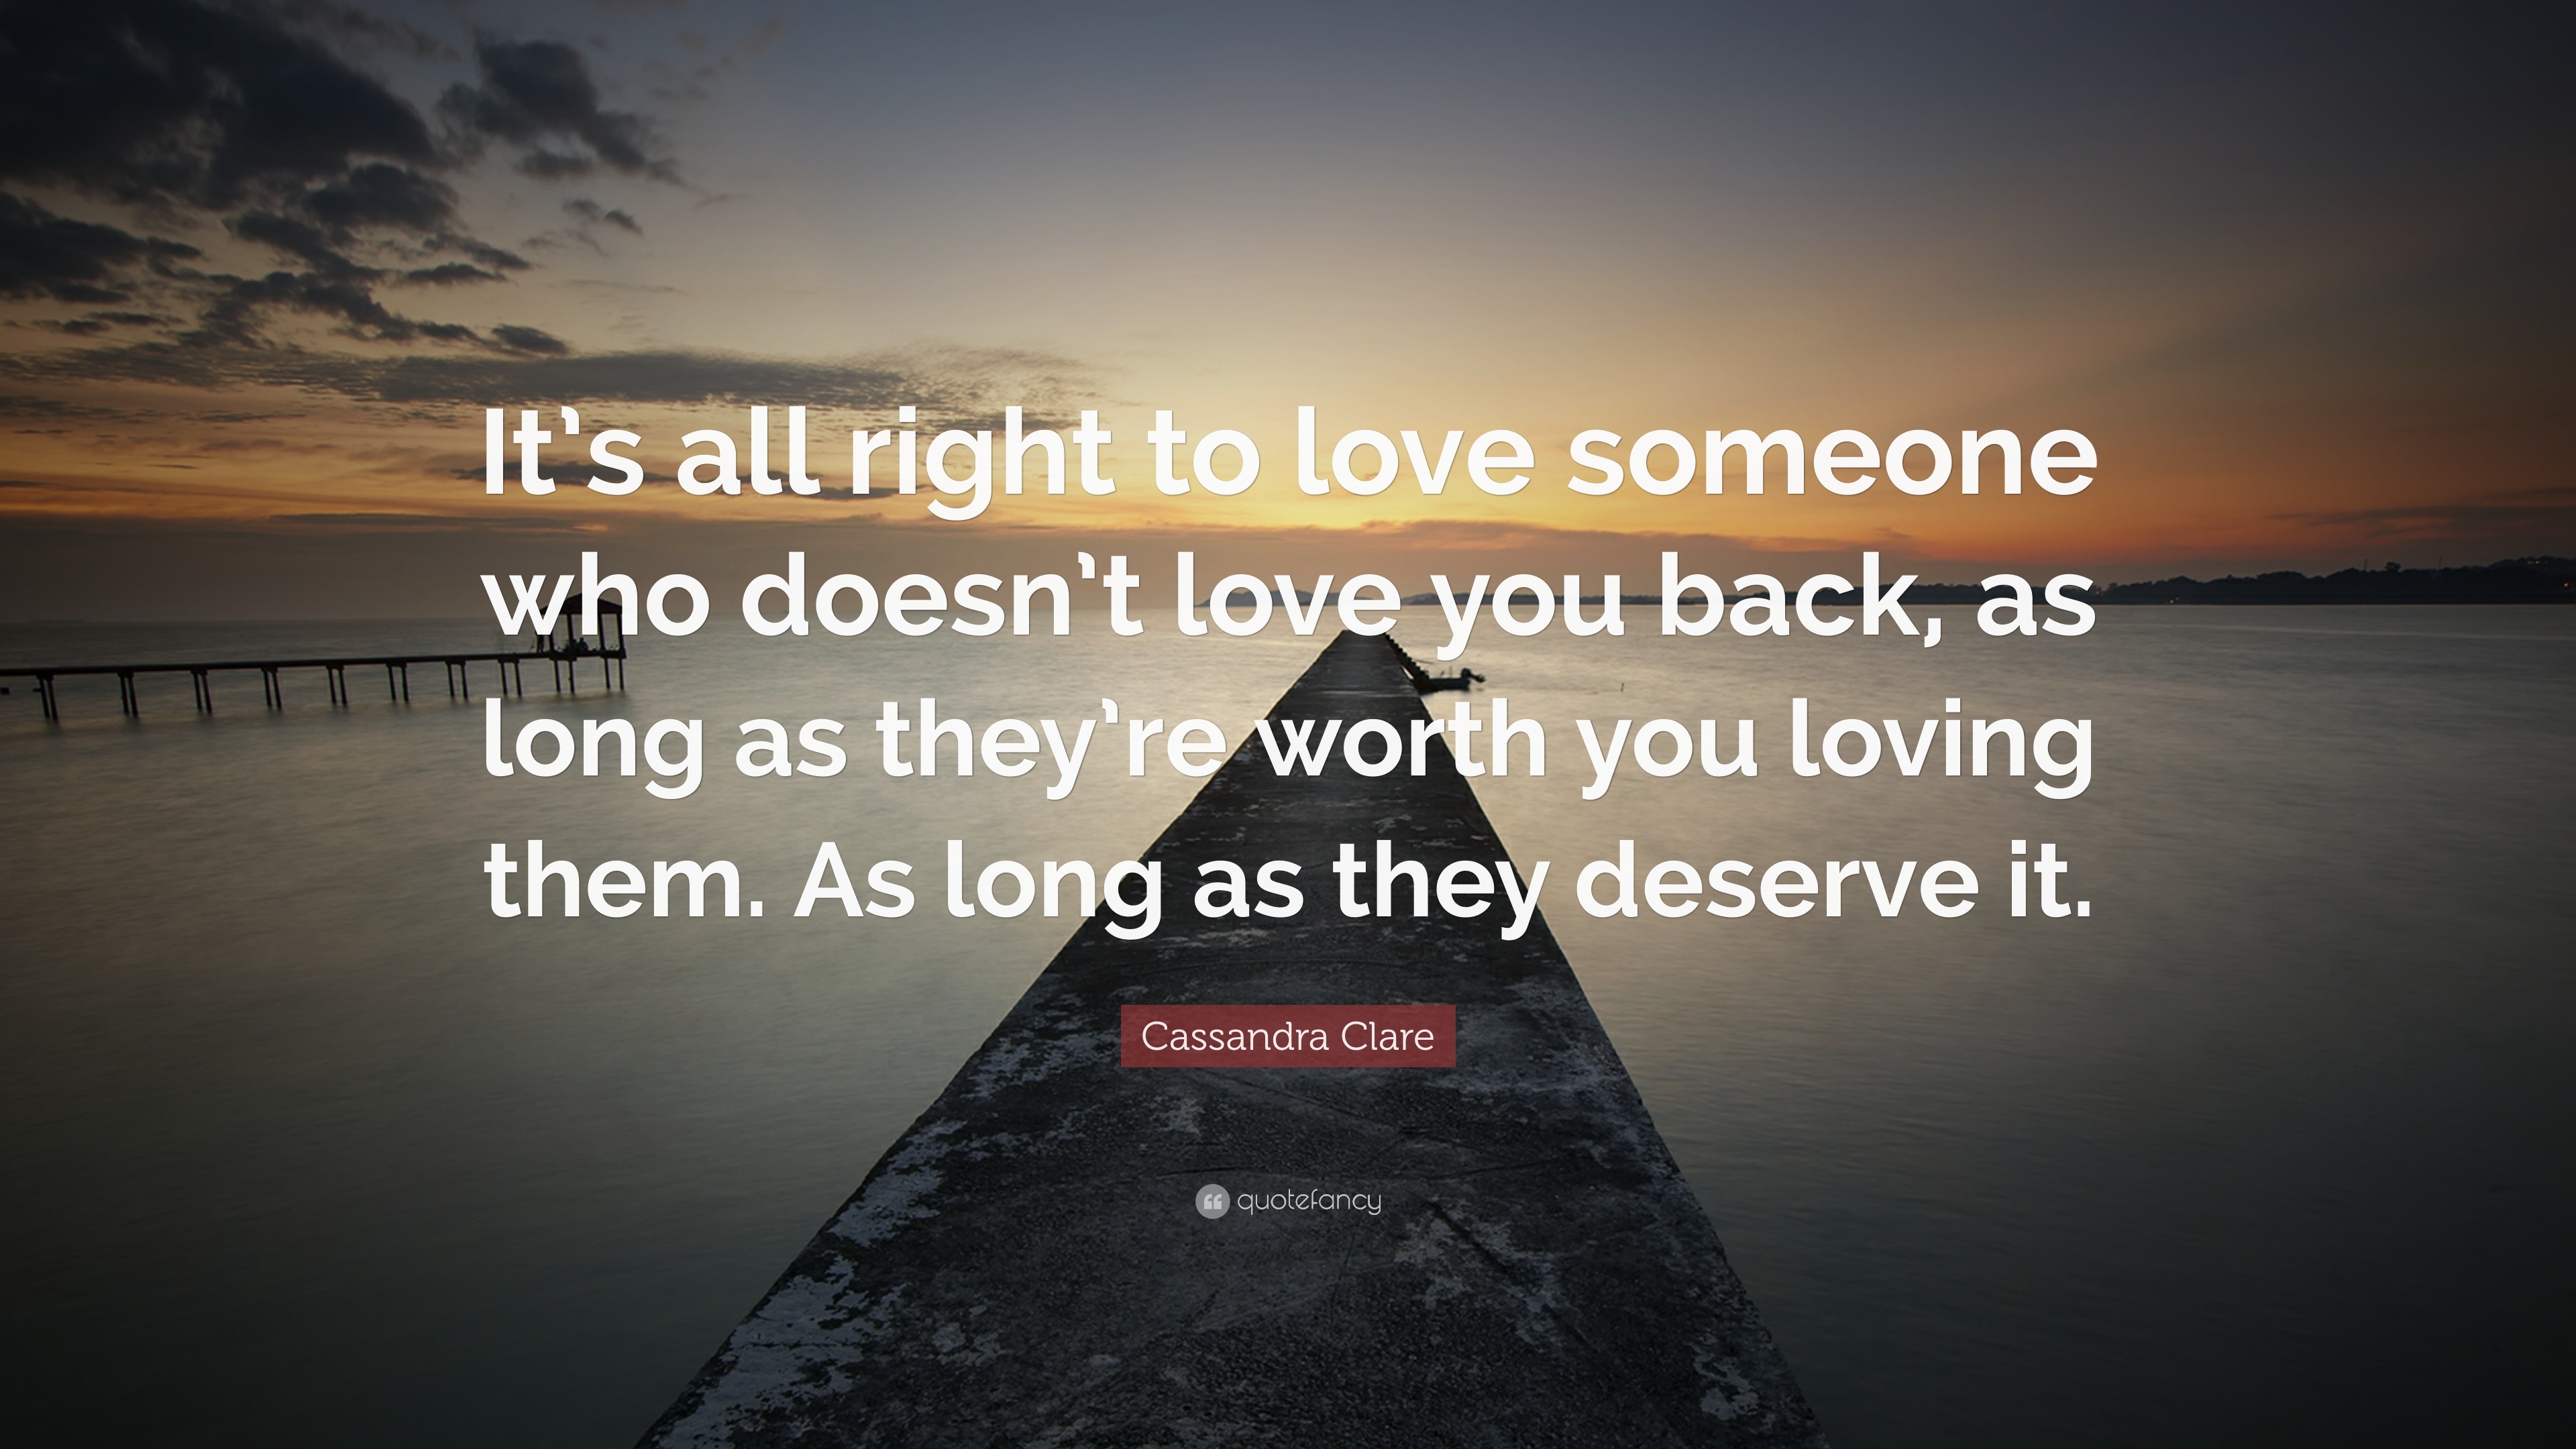 Cassandra Clare Quote “It s all right to love someone who doesn t love